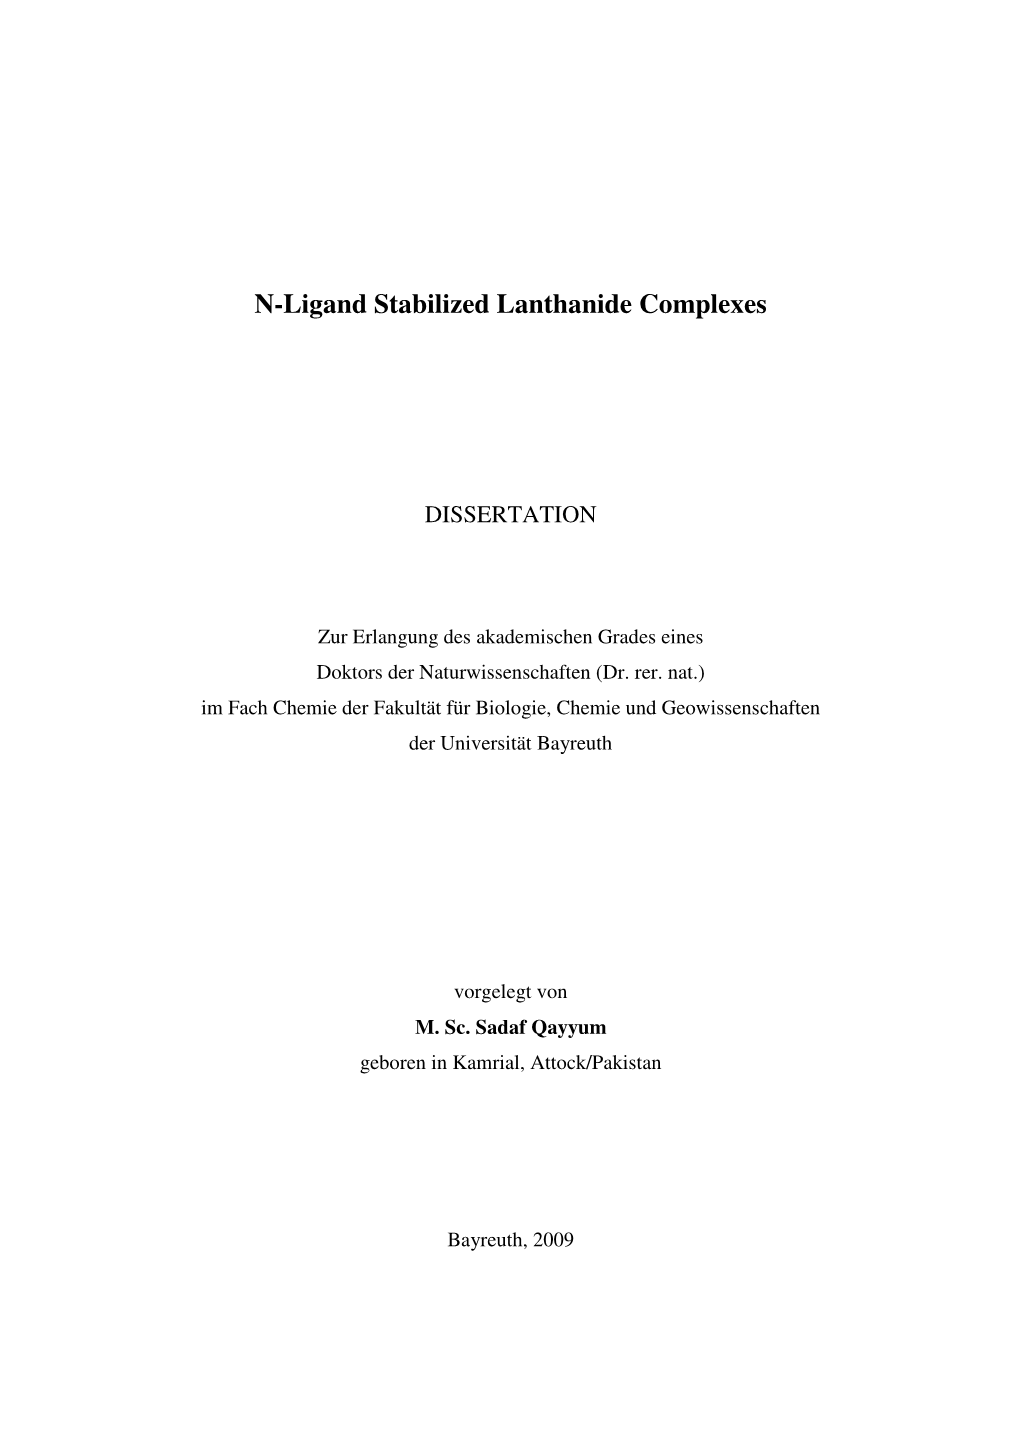 N-Ligand Stabilized Lanthanide Complexes